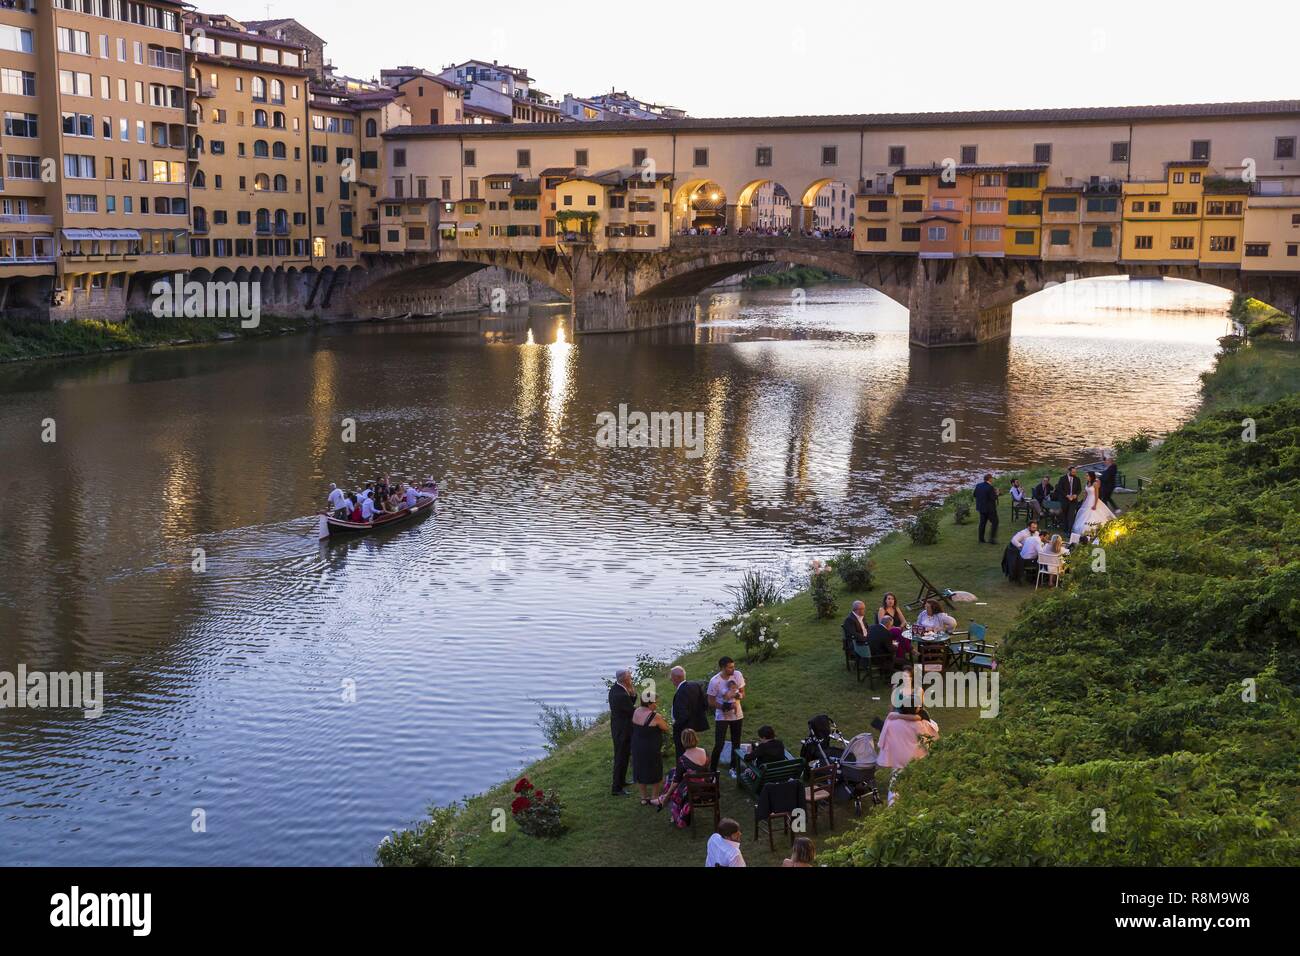 Italy, Tuscany, Florence, historic center listed as World Heritage by UNESCO, Vecchio Bridge, the oldest bridge in the city, Roman time, crosses the Arno river, it is topped by the Vasari Corridor which gives passage to Medicis family from Pitti Palace to the Uffizi Gallery and Palazzo Vecchio Stock Photo